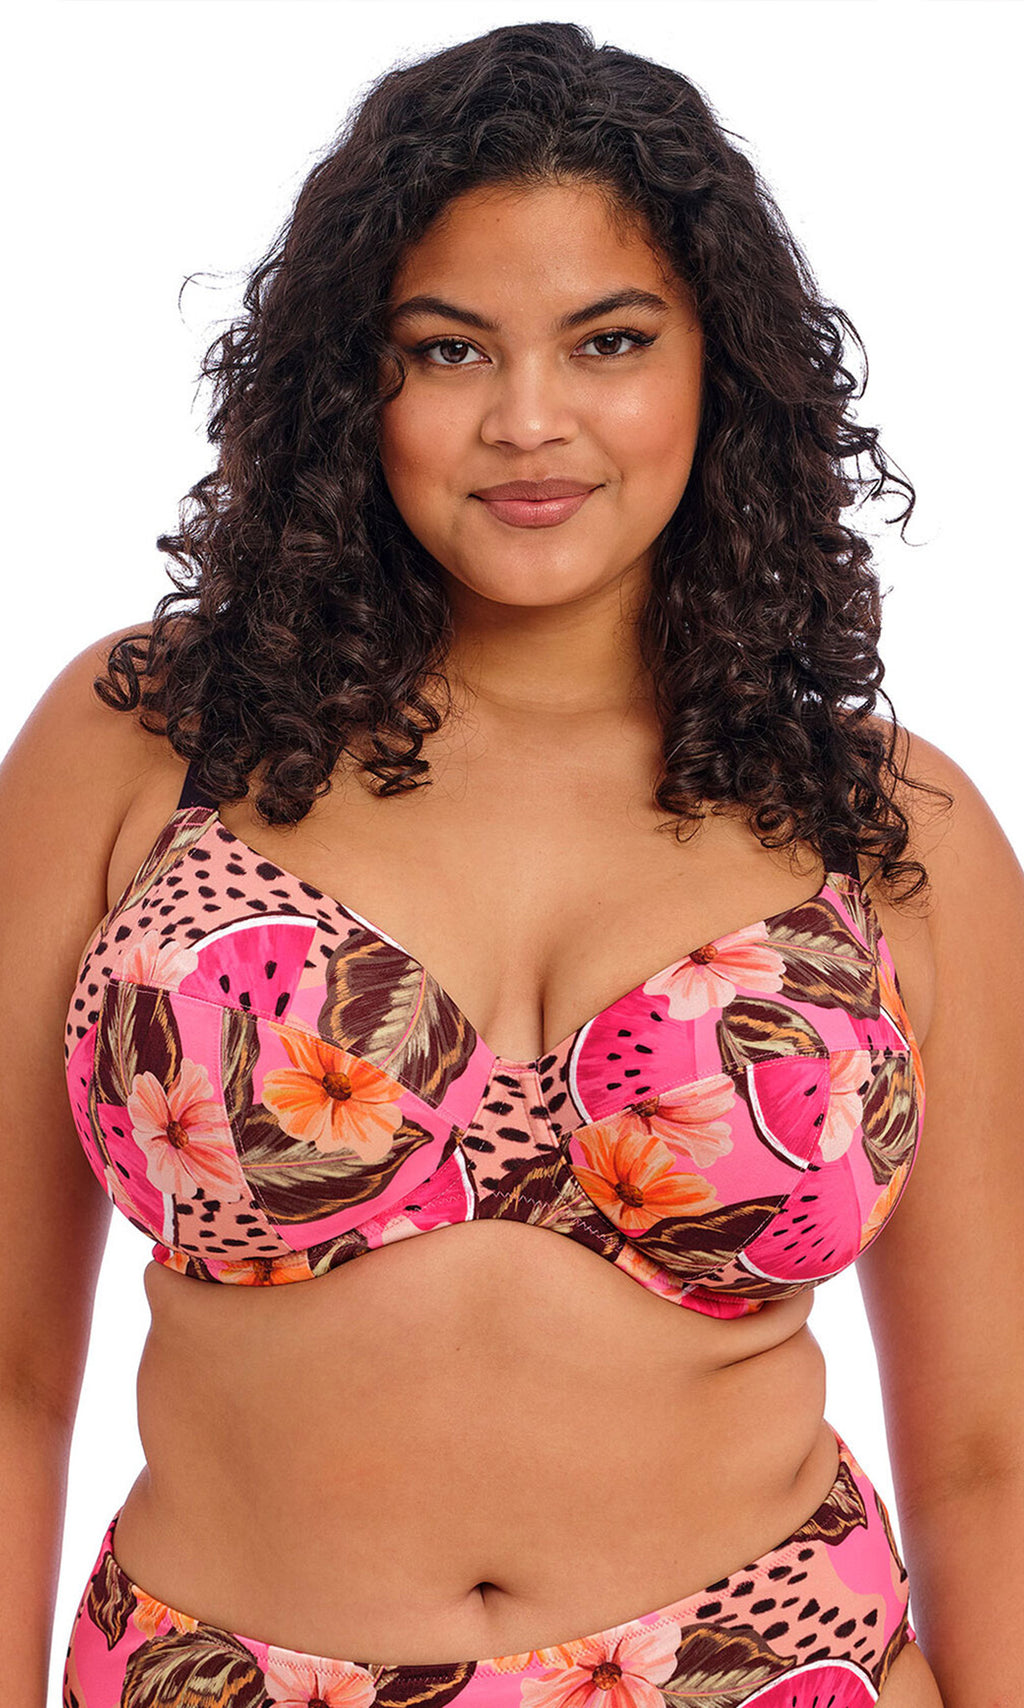 Cabana Nights Multi UW Plunge Bikini Top, Special Order E Cup to JJ Cup